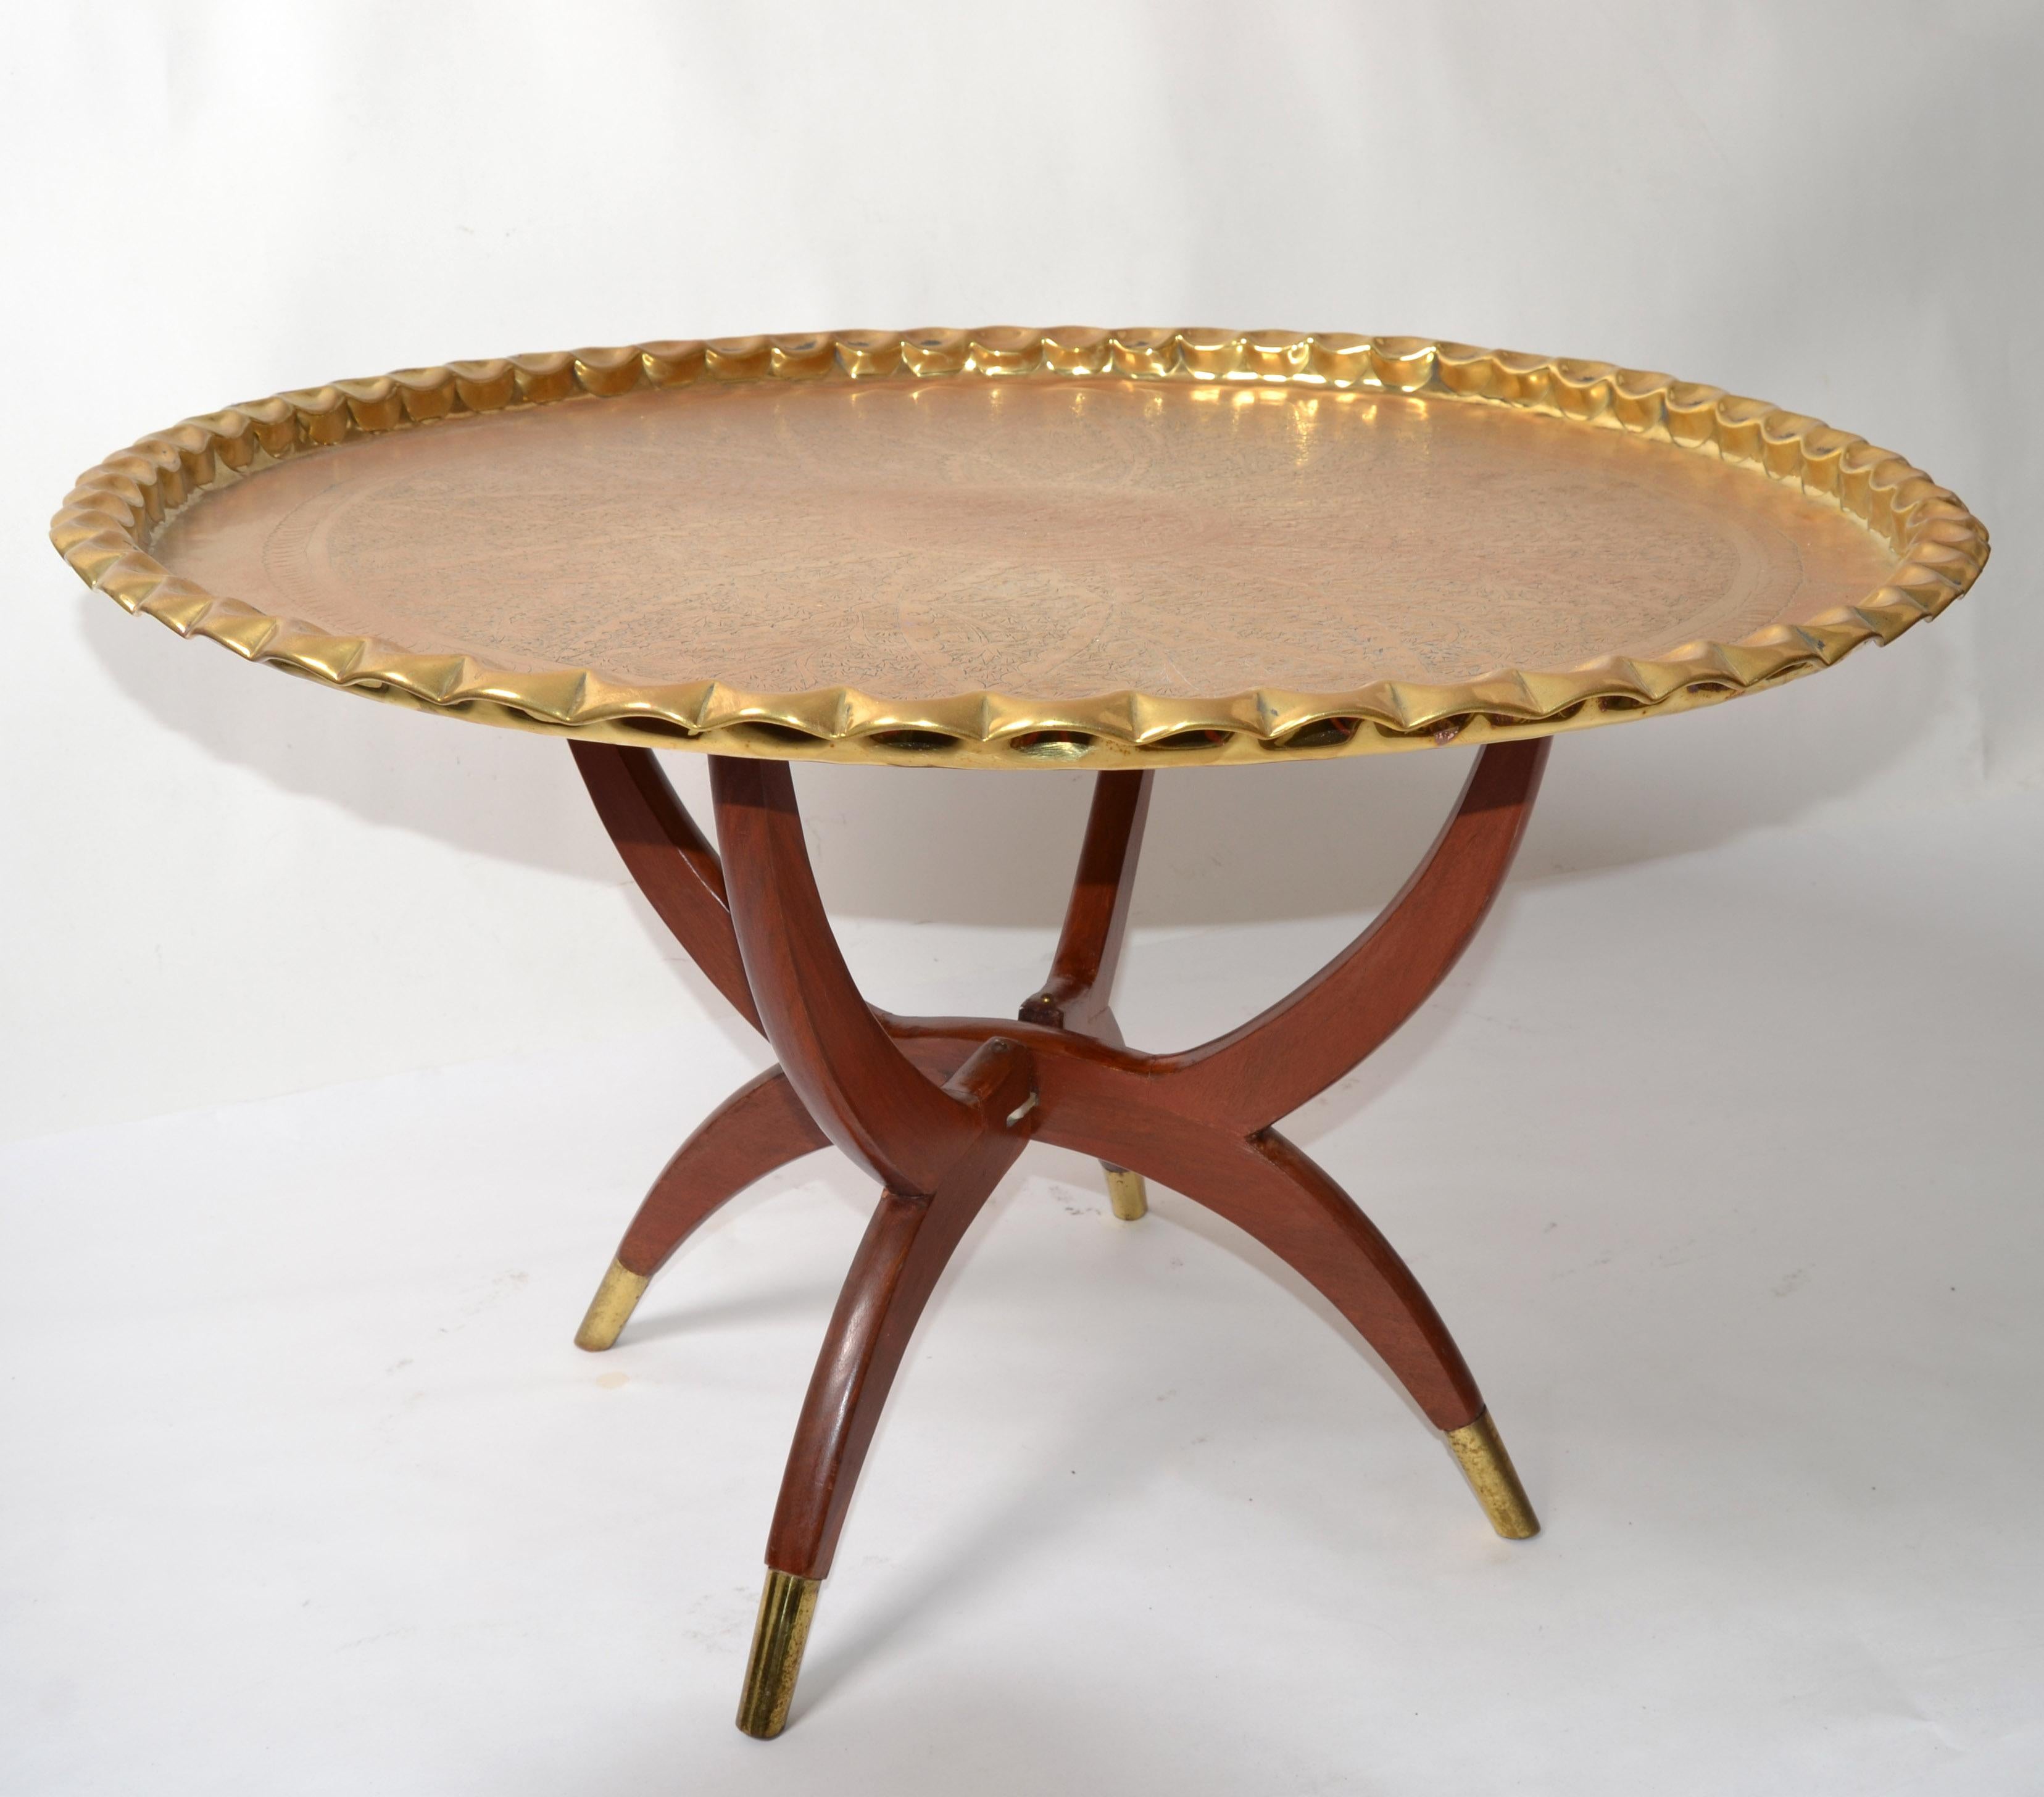 Hand-Crafted Oriental Vintage Round Walnut Spider Leg and Bronze Moroccan Tray Coffee Table For Sale